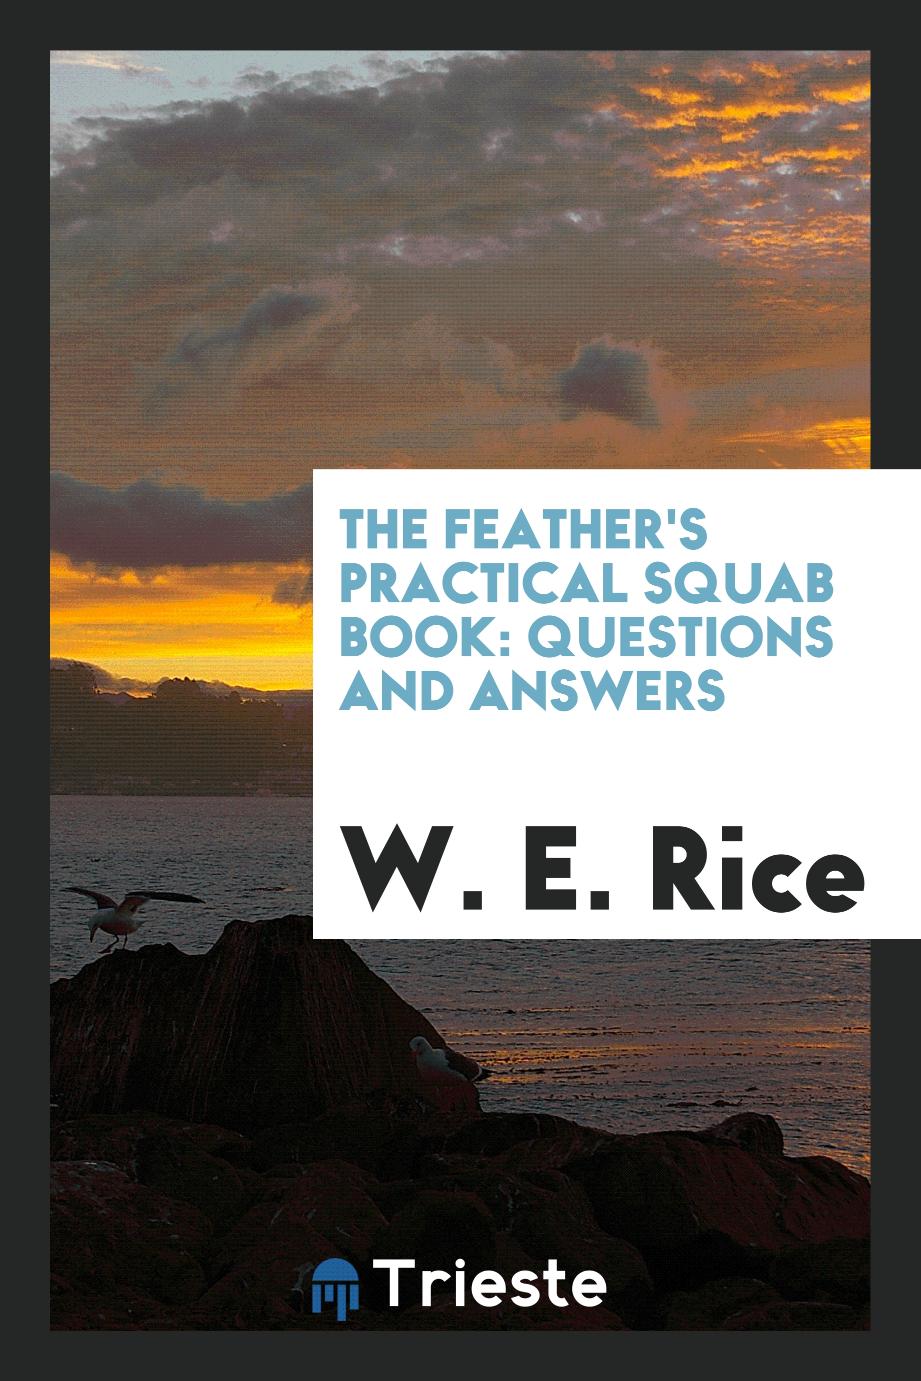 The Feather's Practical Squab Book: Questions and Answers